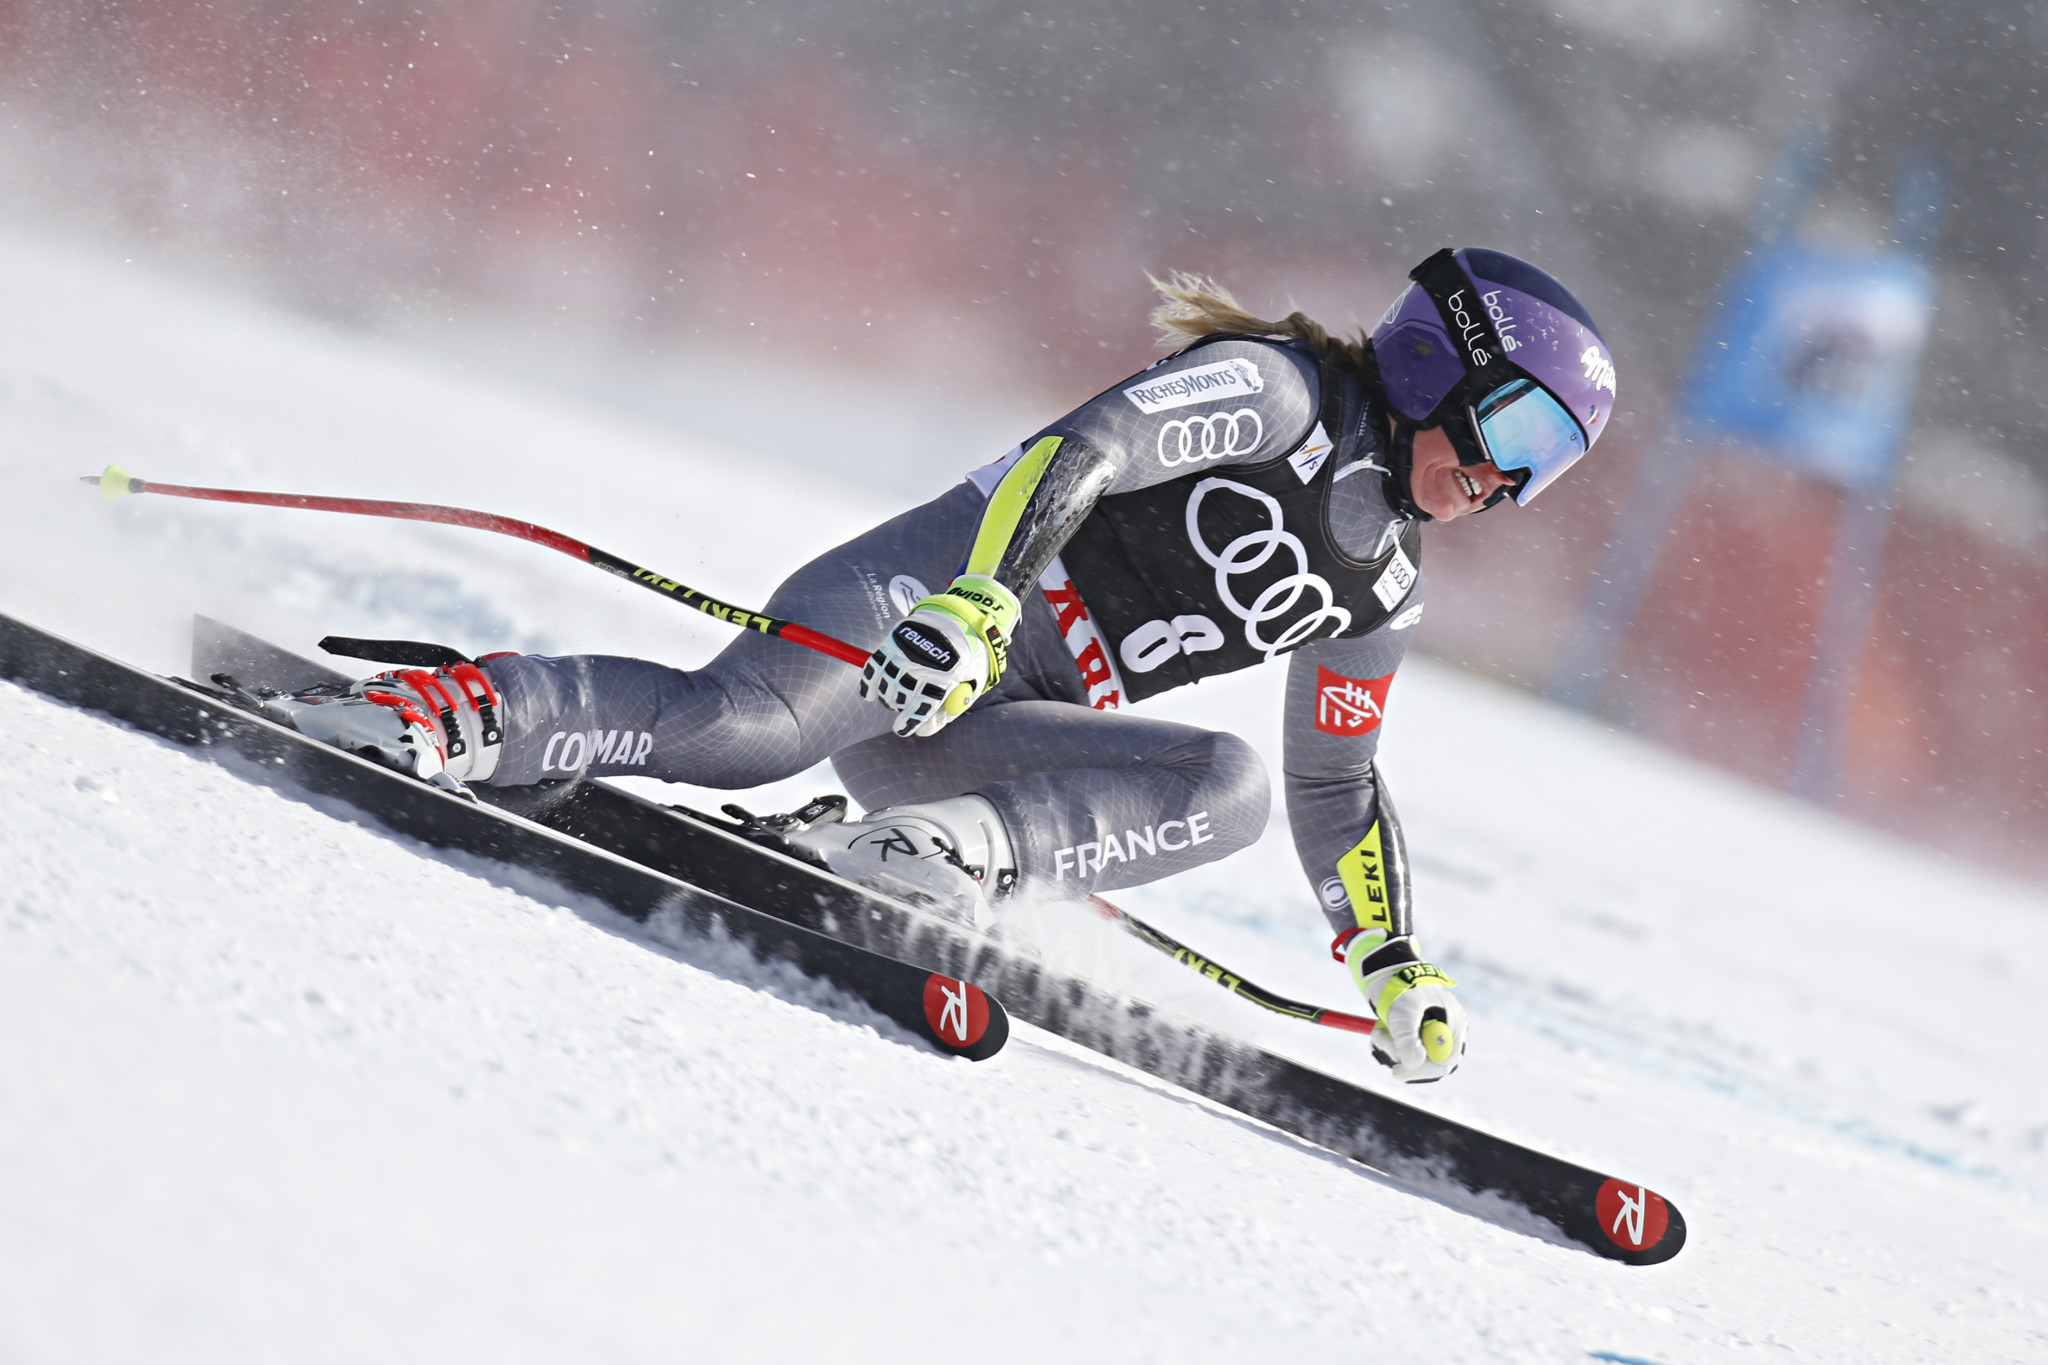 Reigning world giant slalom champion Tessa Worley has been selected on the women's team ©Getty Images